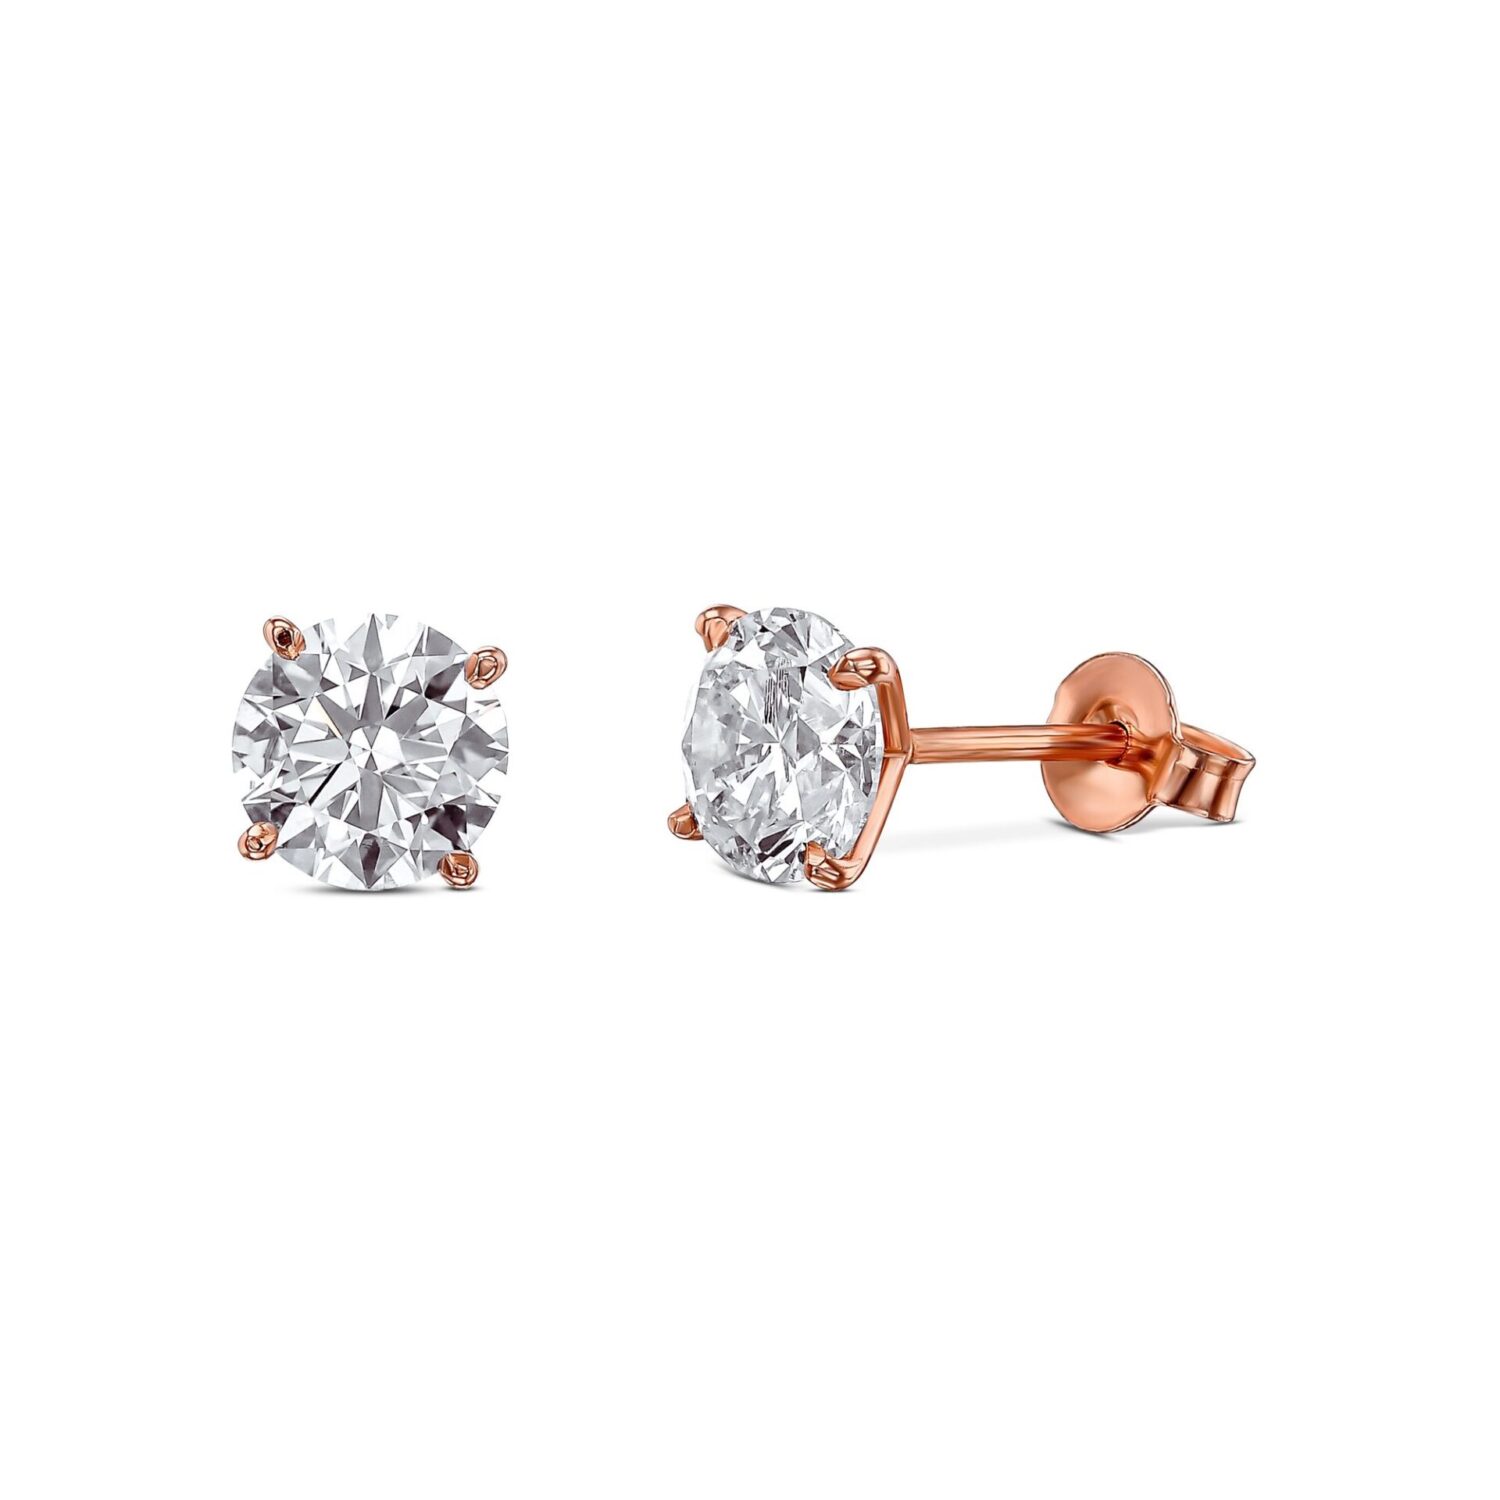 Lab grown diamonds in Cyprus - Classic Earrings 1.2 Carat best quality and price